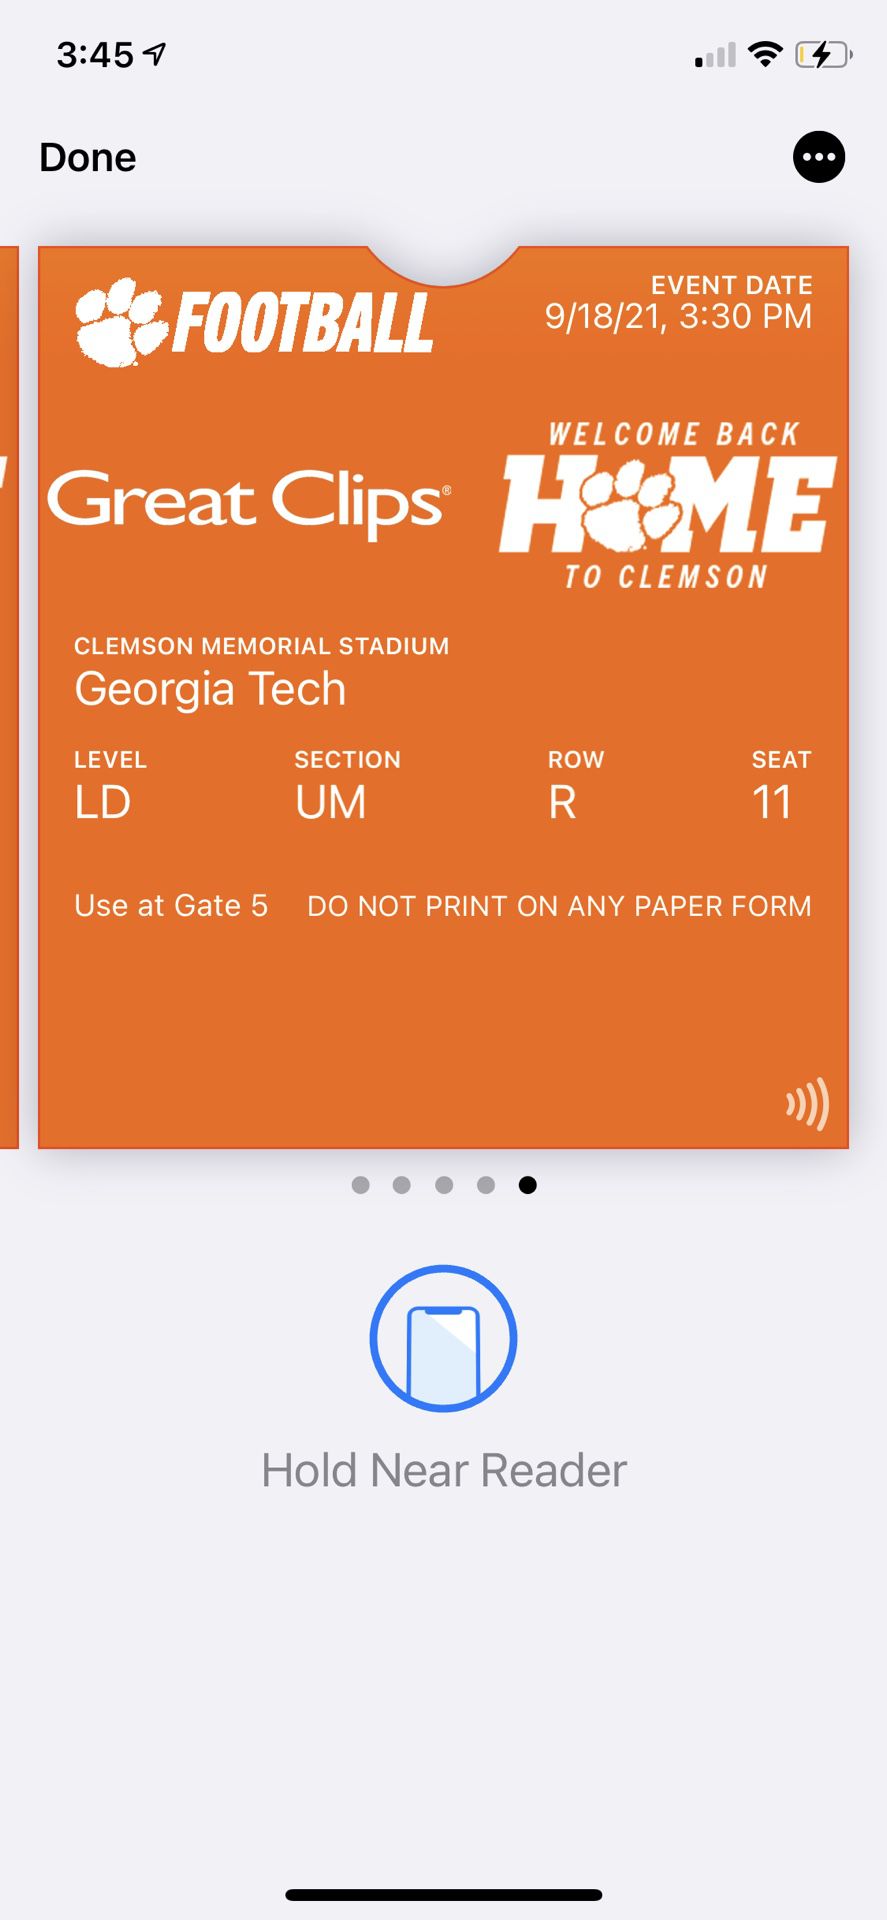 4 Lower Deck Tickets for Clemson Vs Georgia Tech With Parking Pass